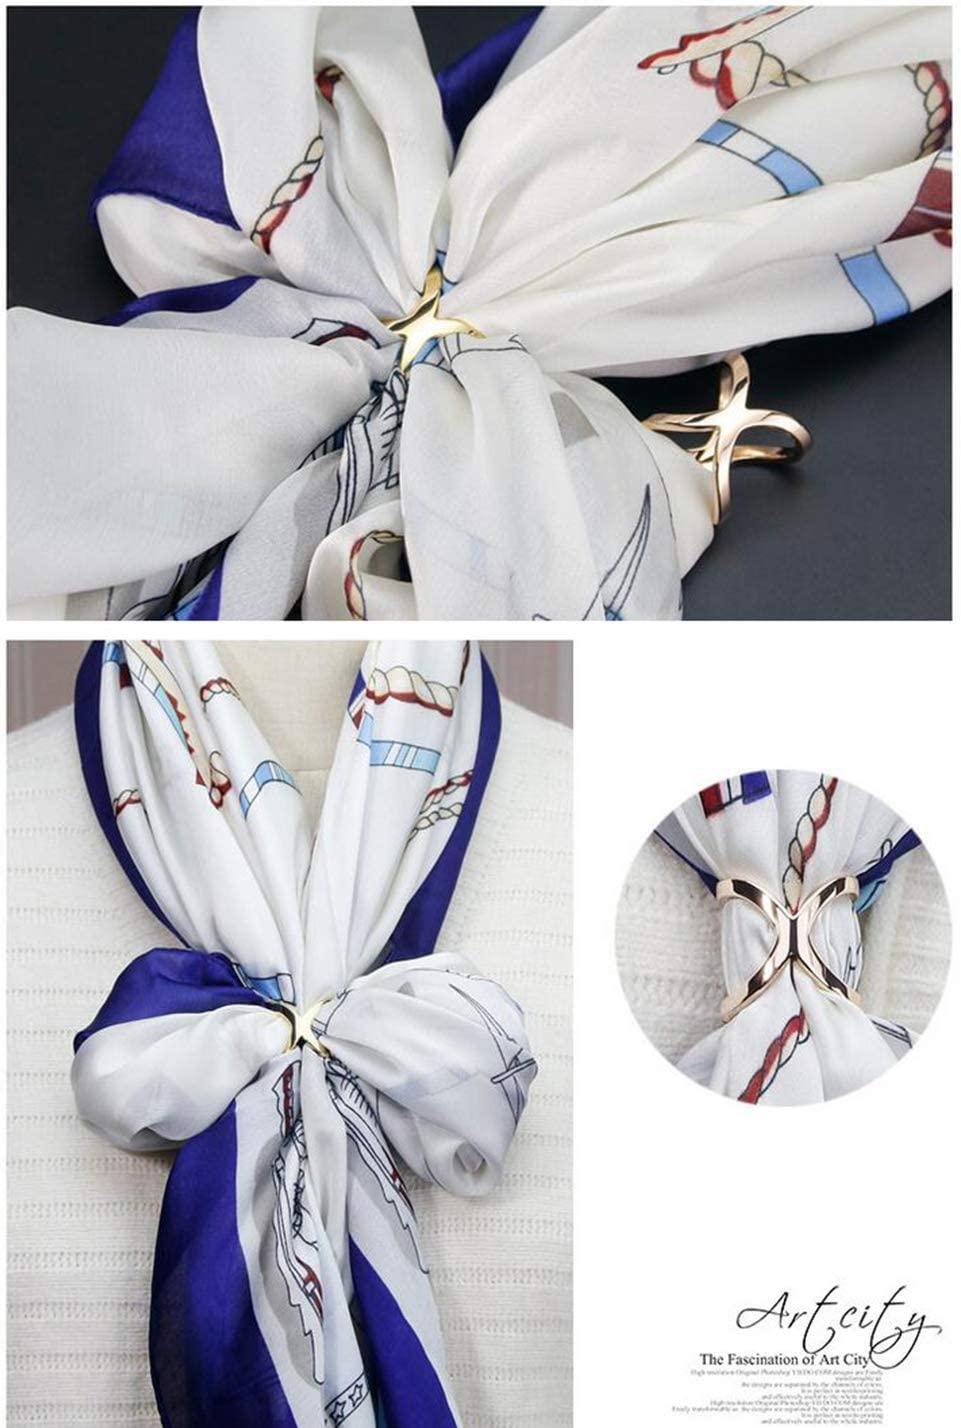 Elegant craft scarf rings From Featured Wholesalers